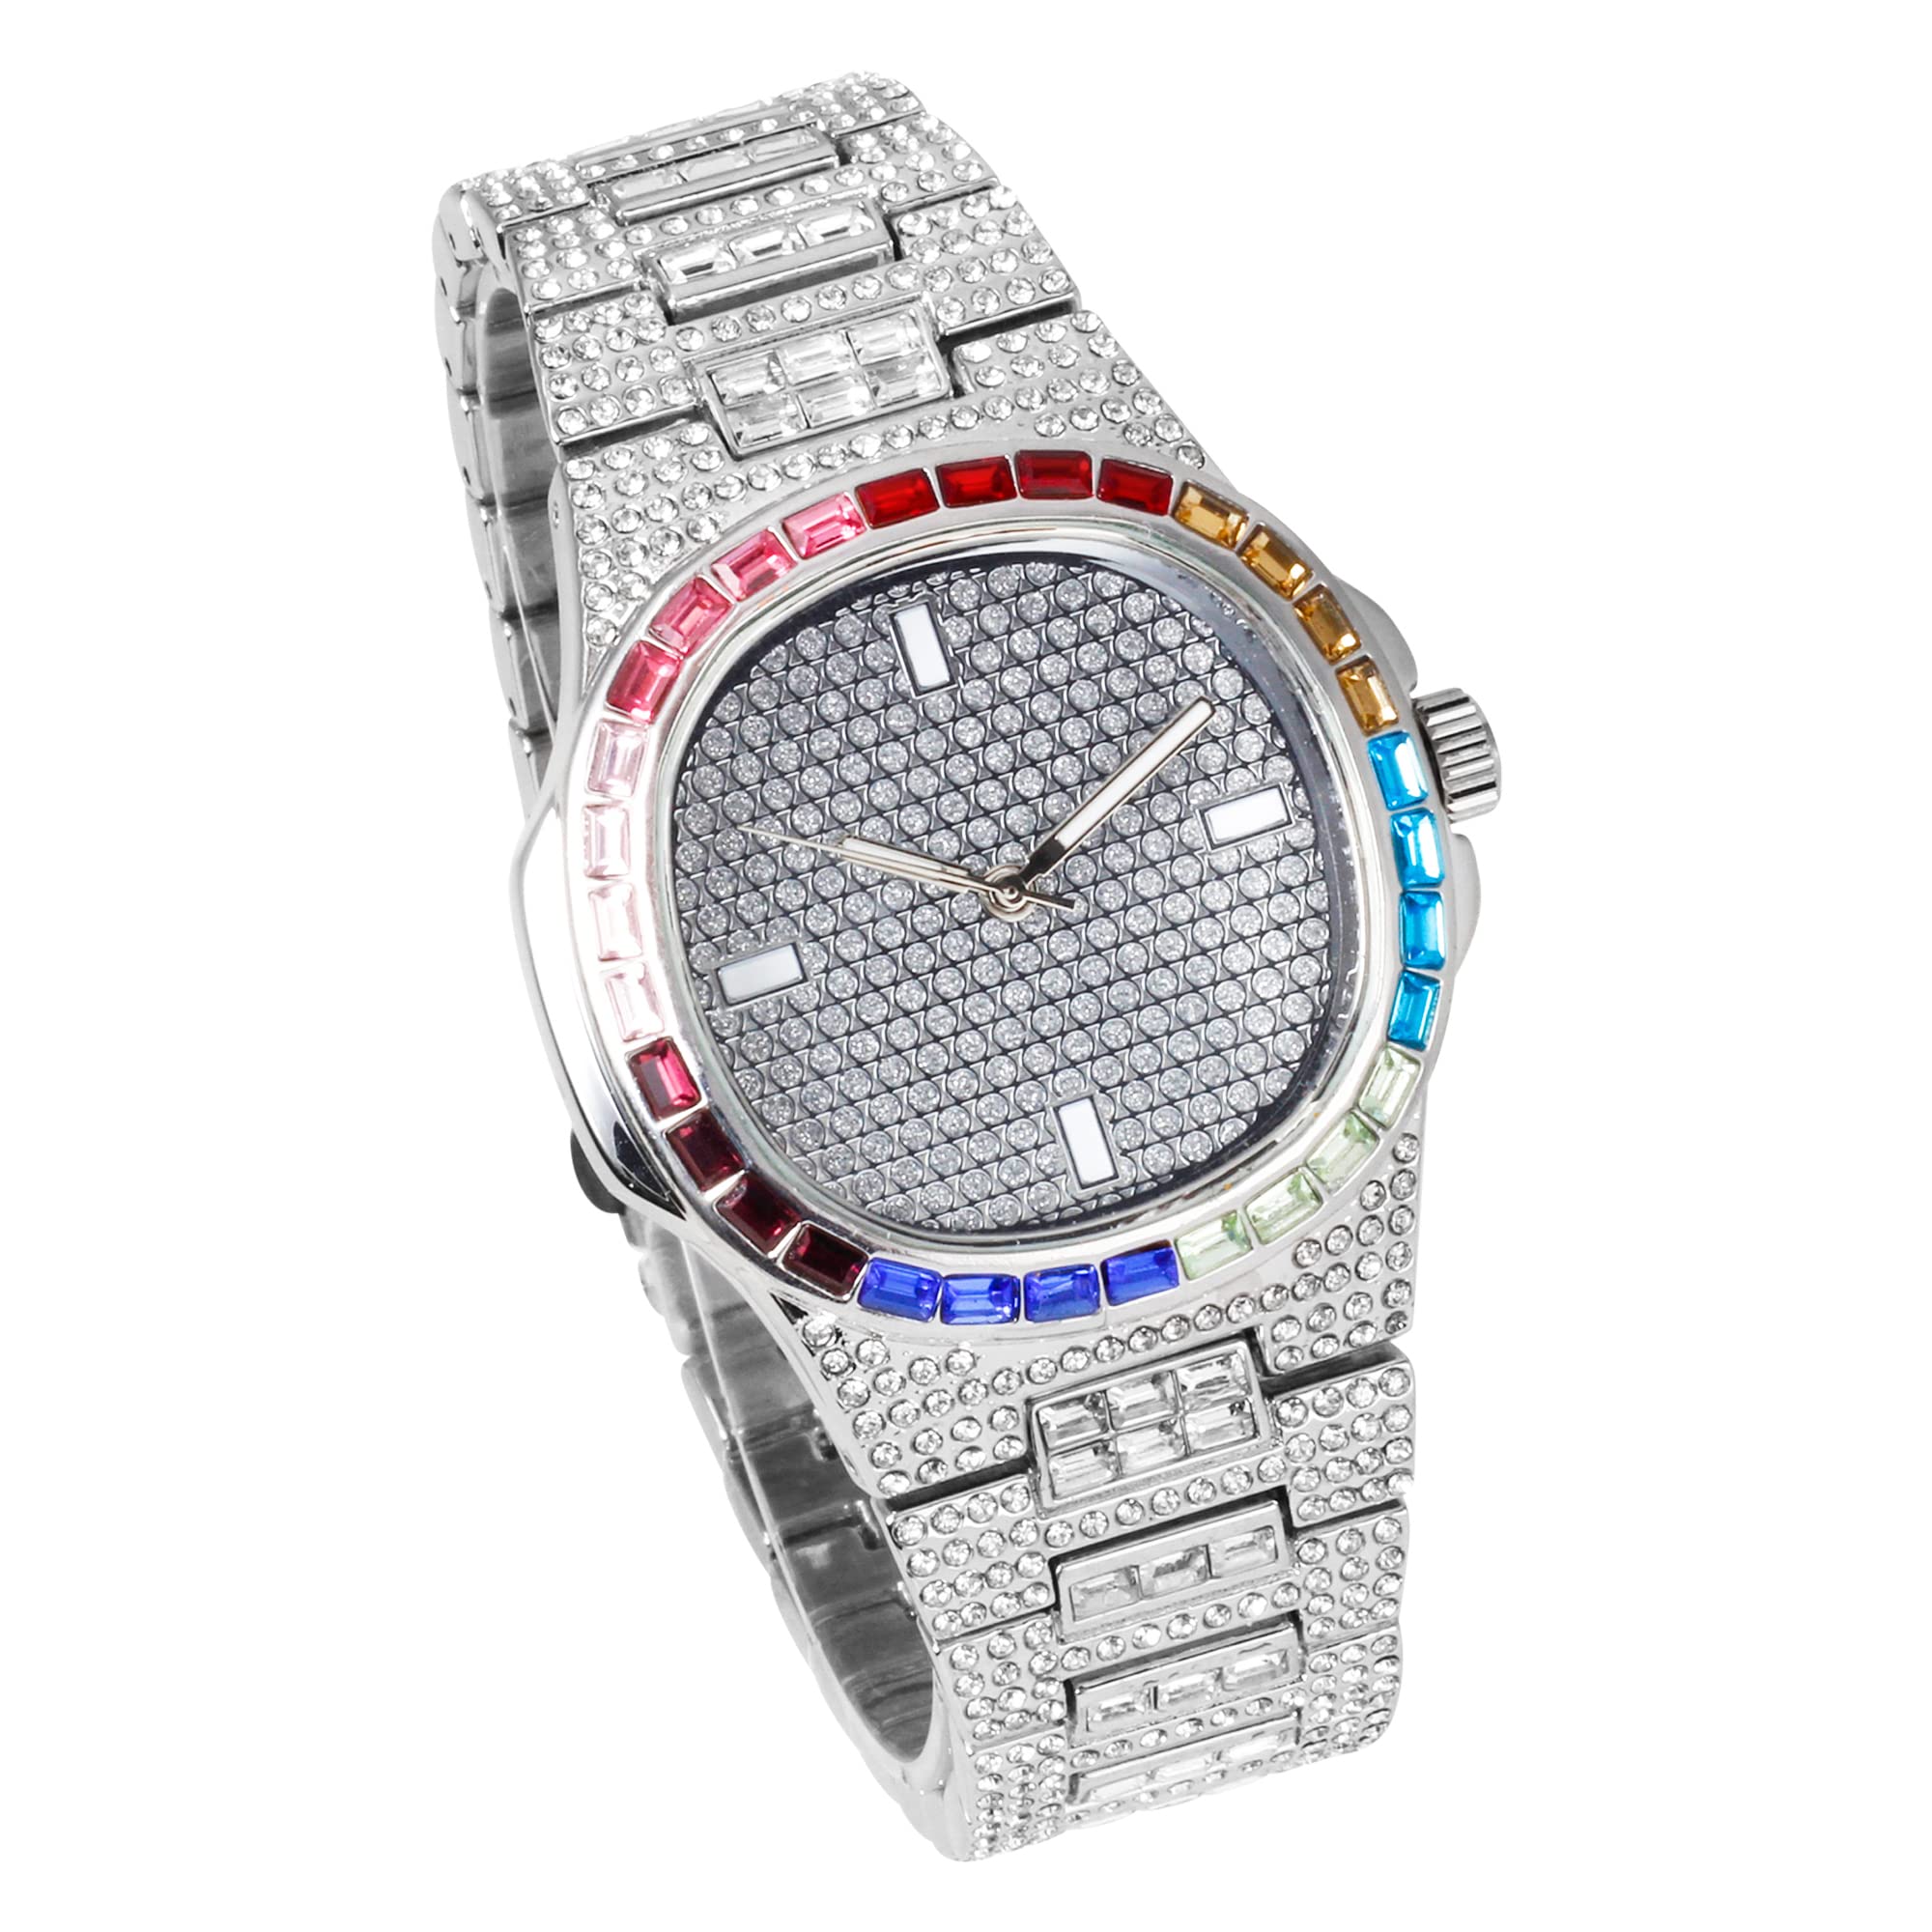 Men's Square Dial Watch 42mm Silver - "Fully Iced Band"